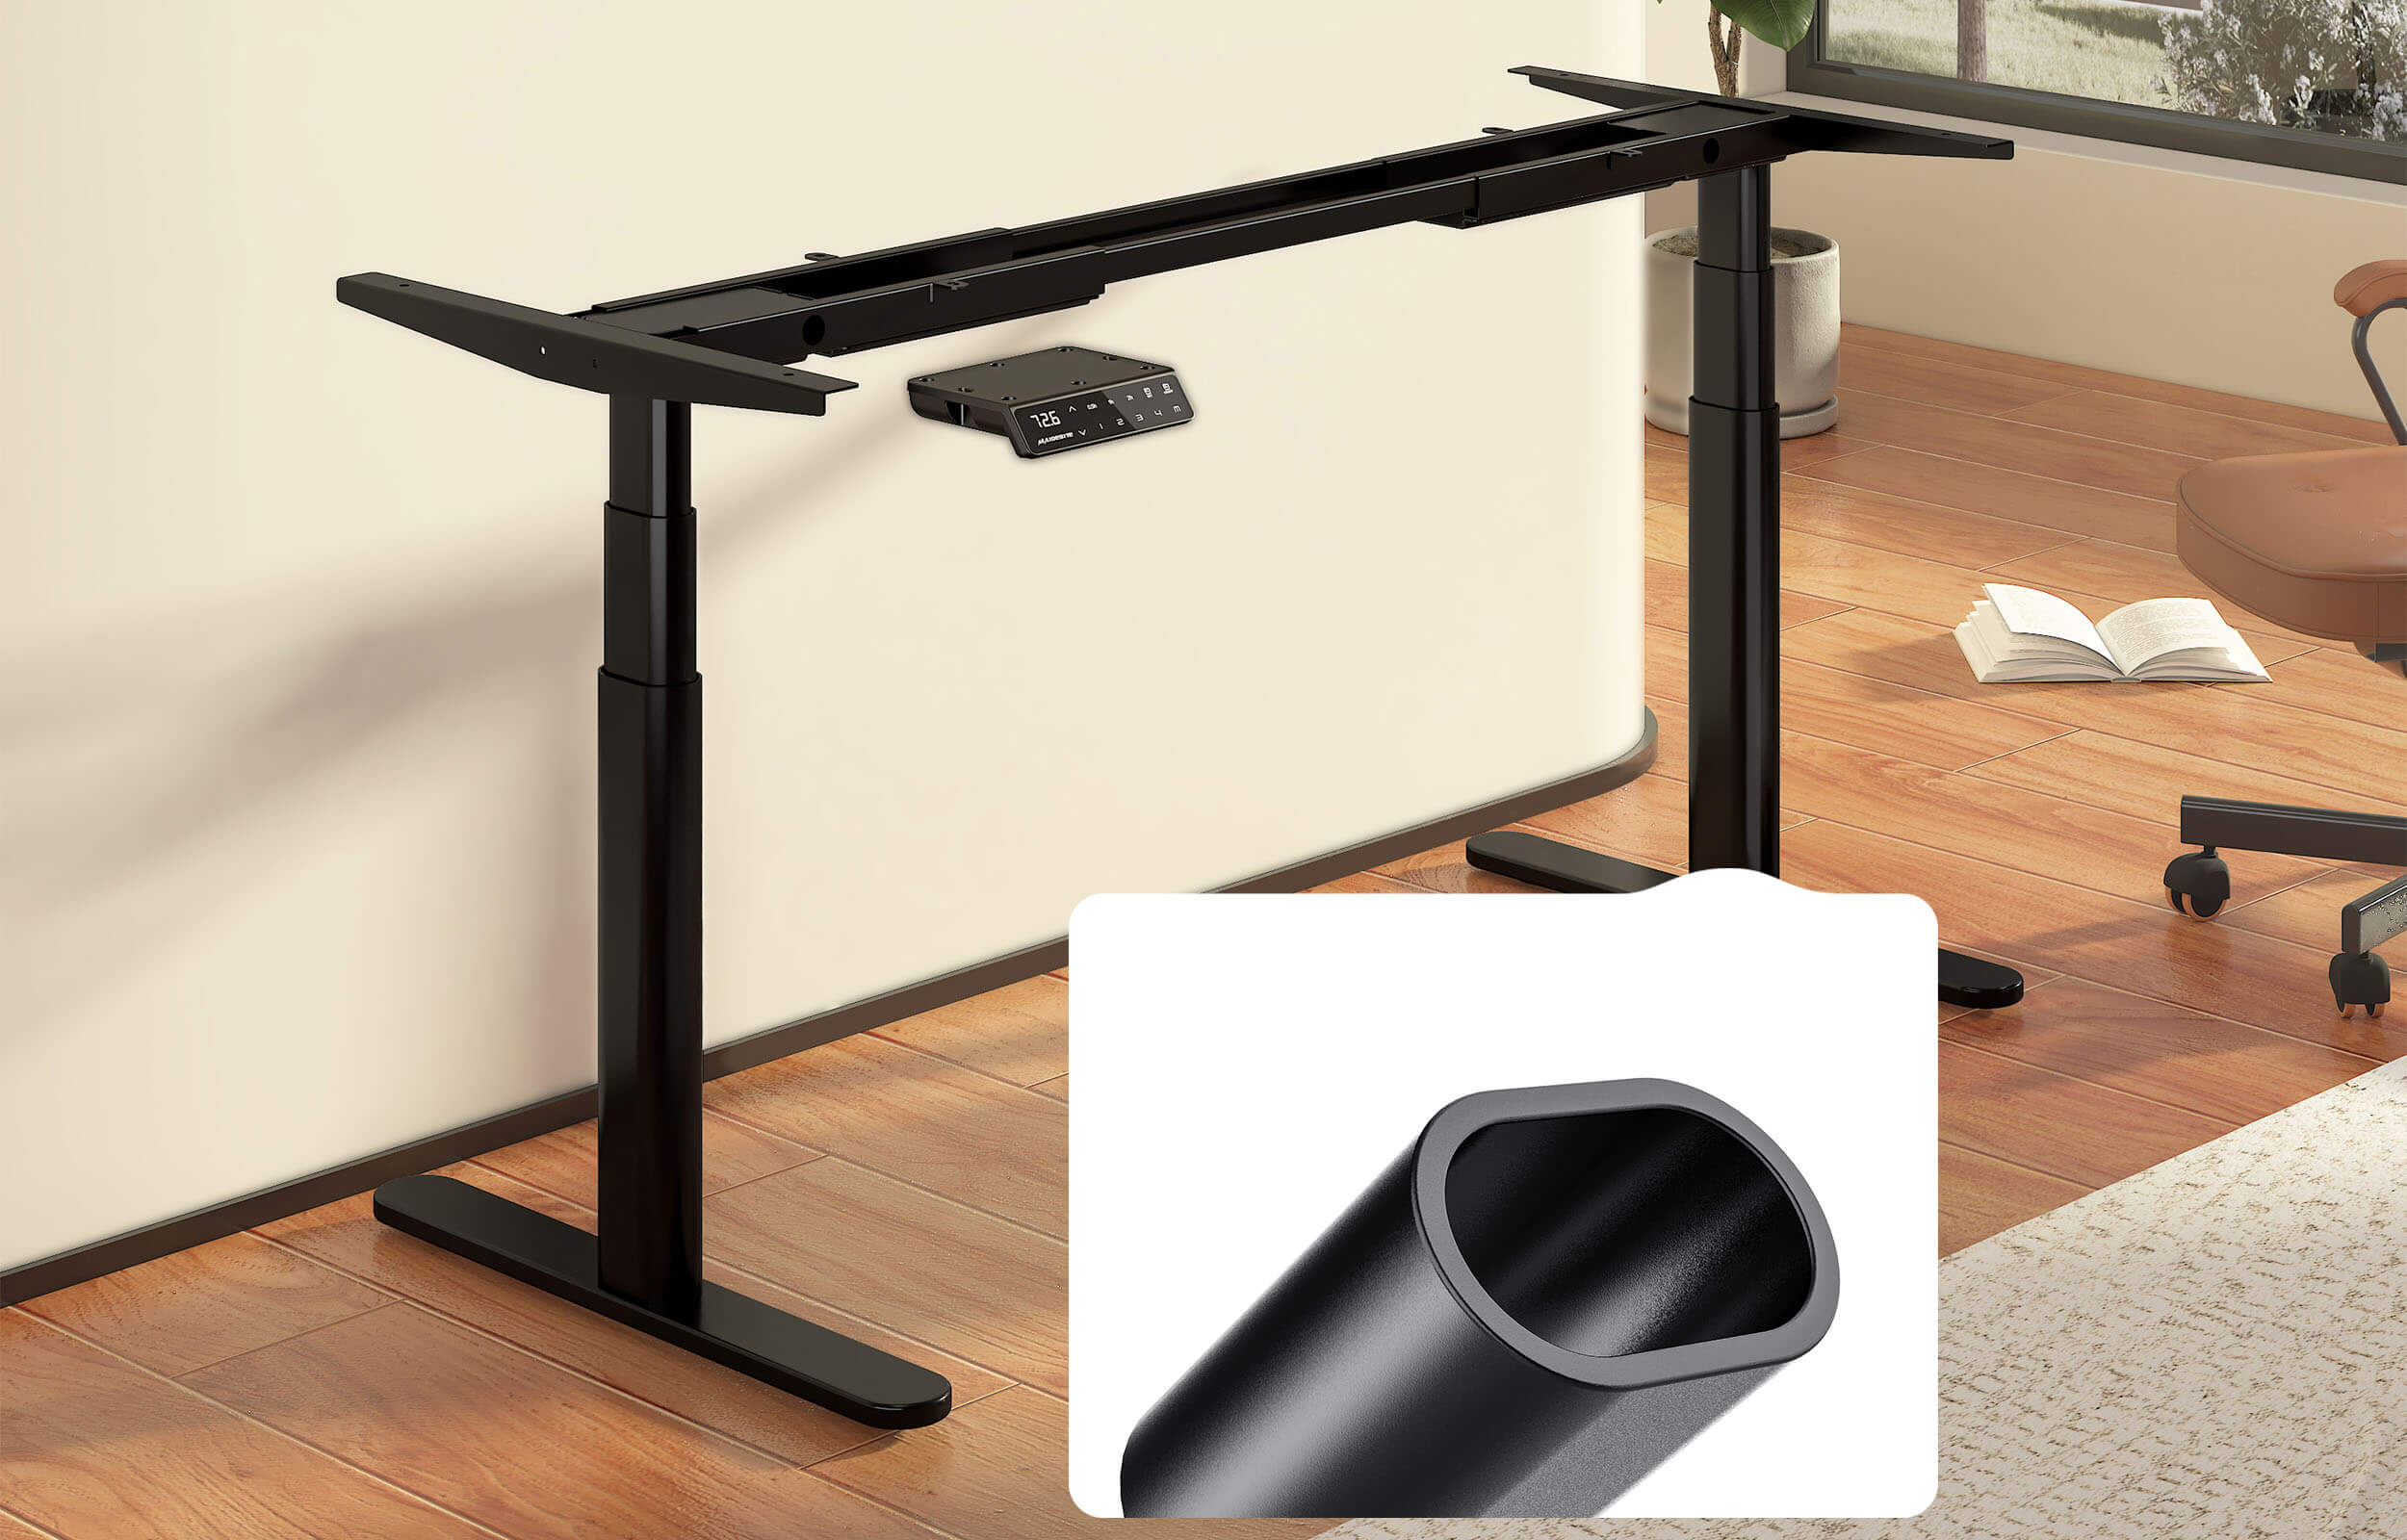 TH2 Pro Plus electric standing desk oval leg more stable